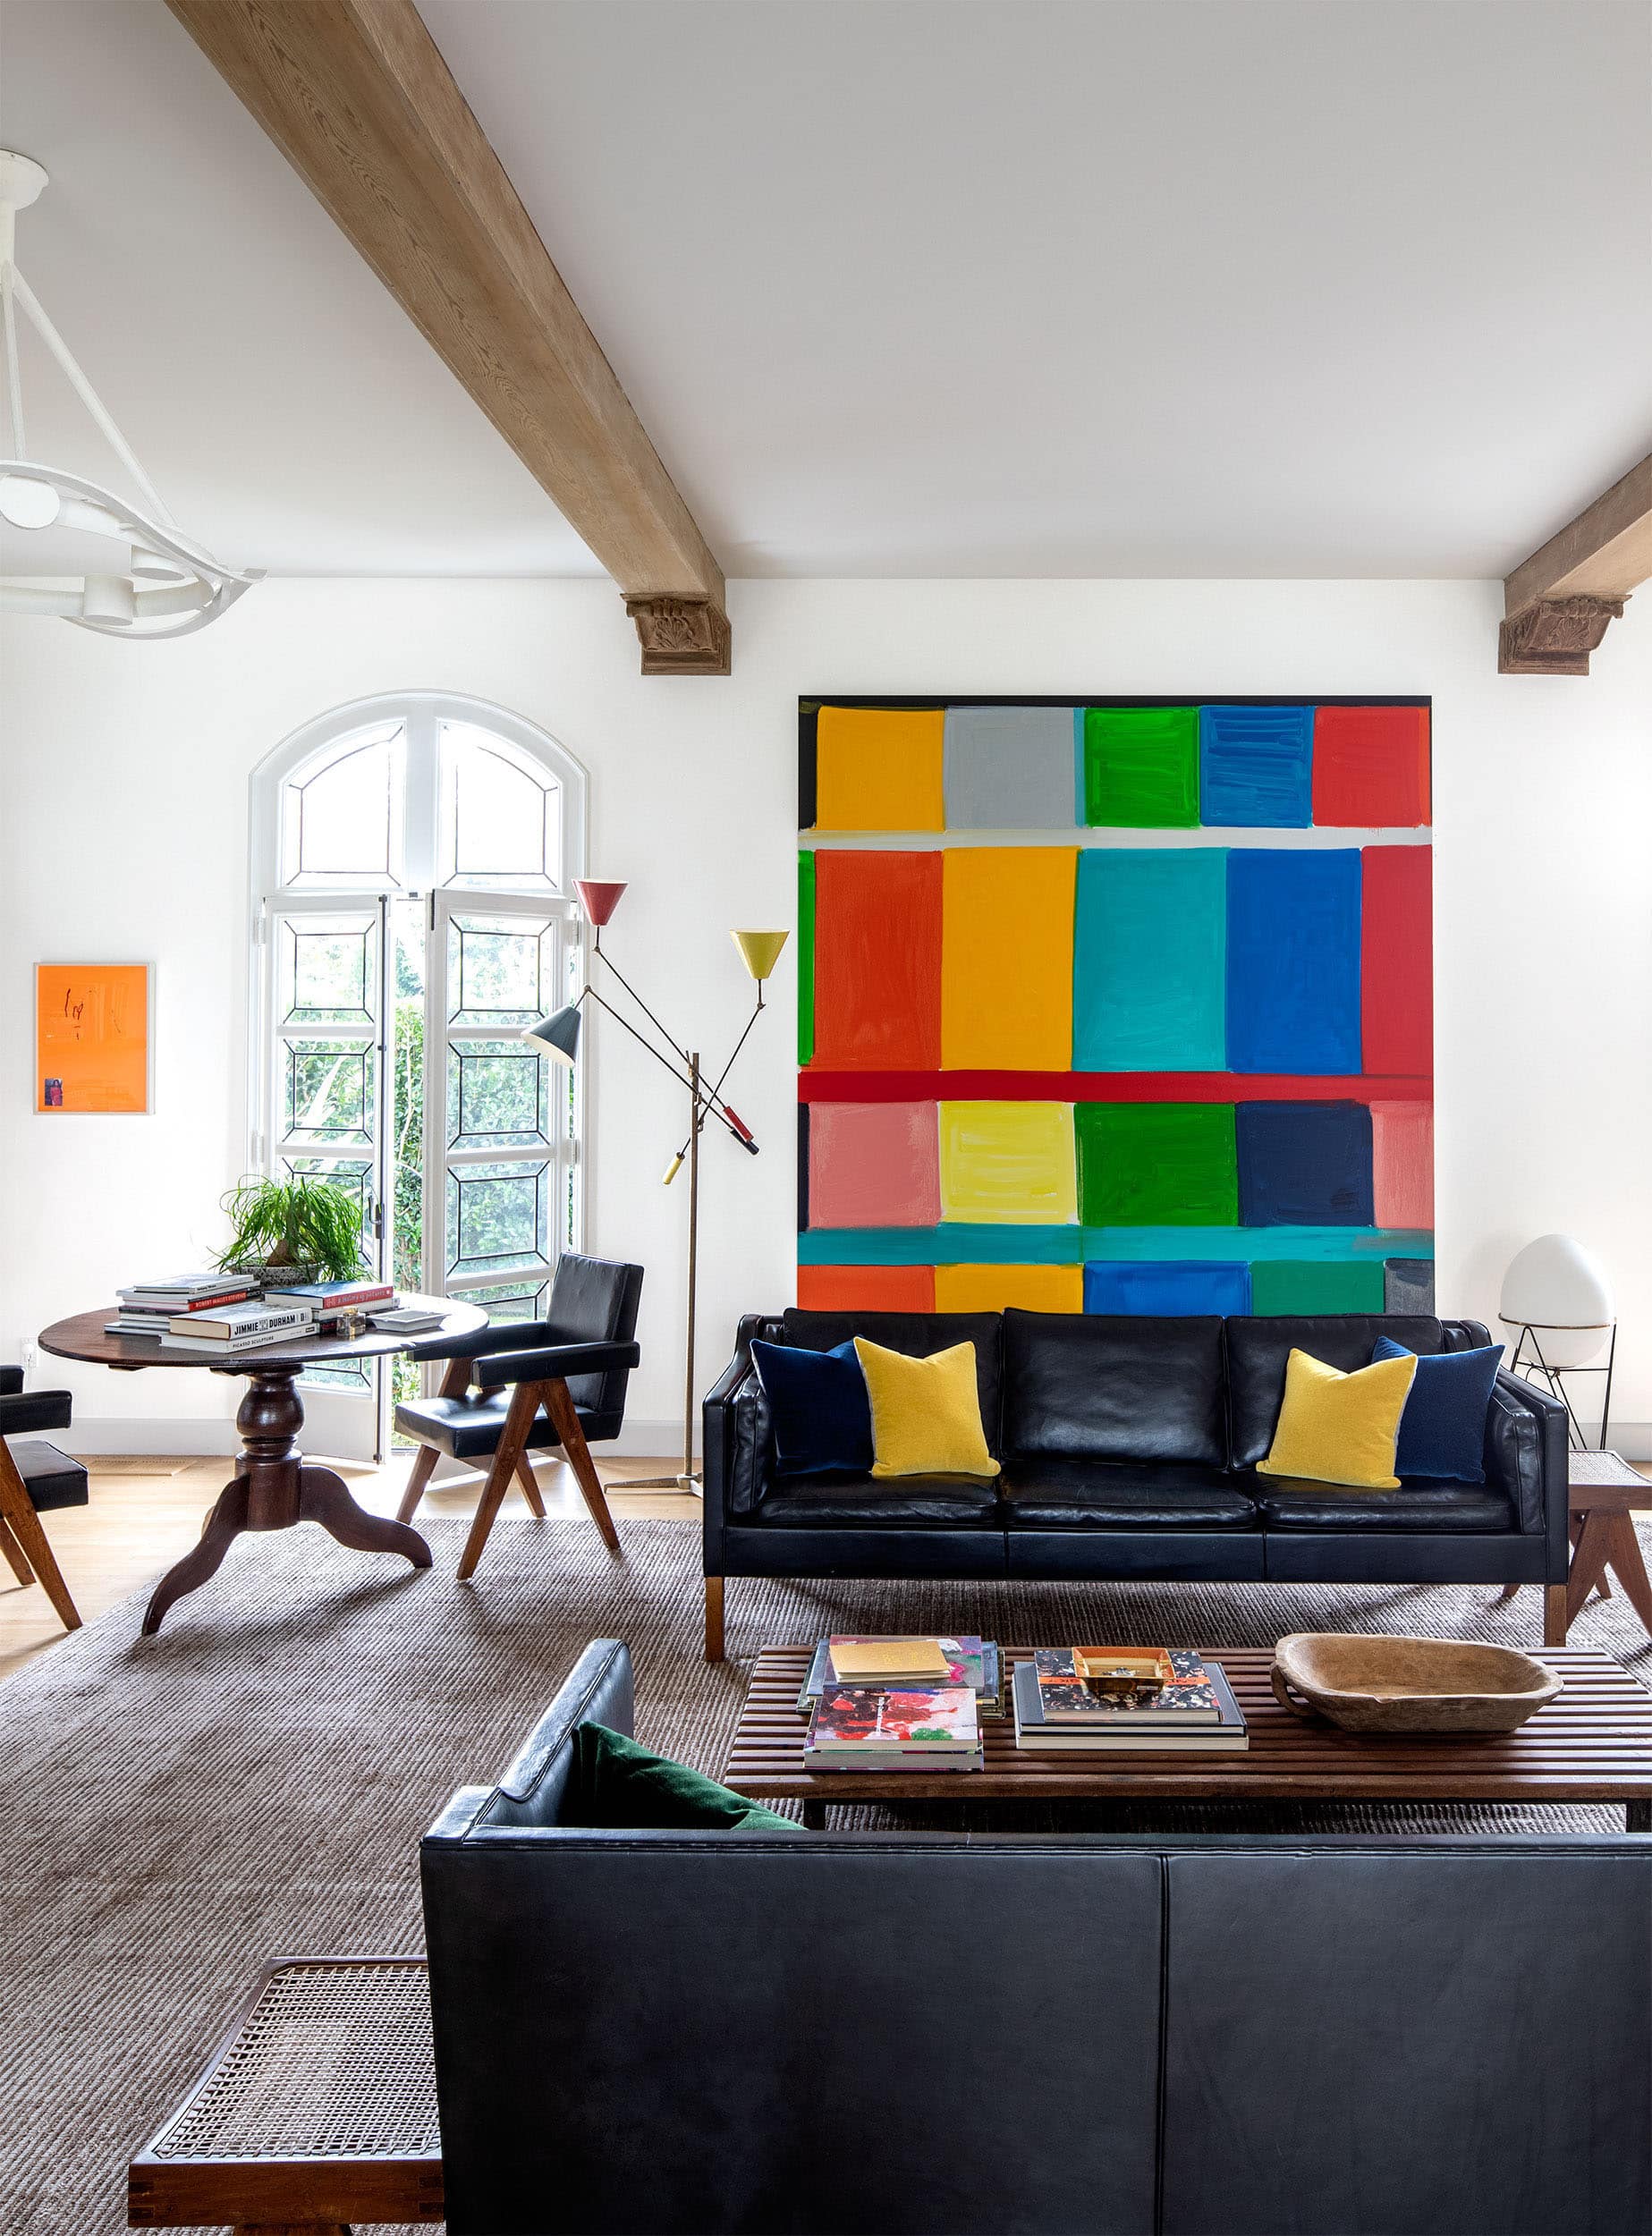 12 Dramatic Rooms from the 1stDibs 50 Where Art Is the Star of the Show